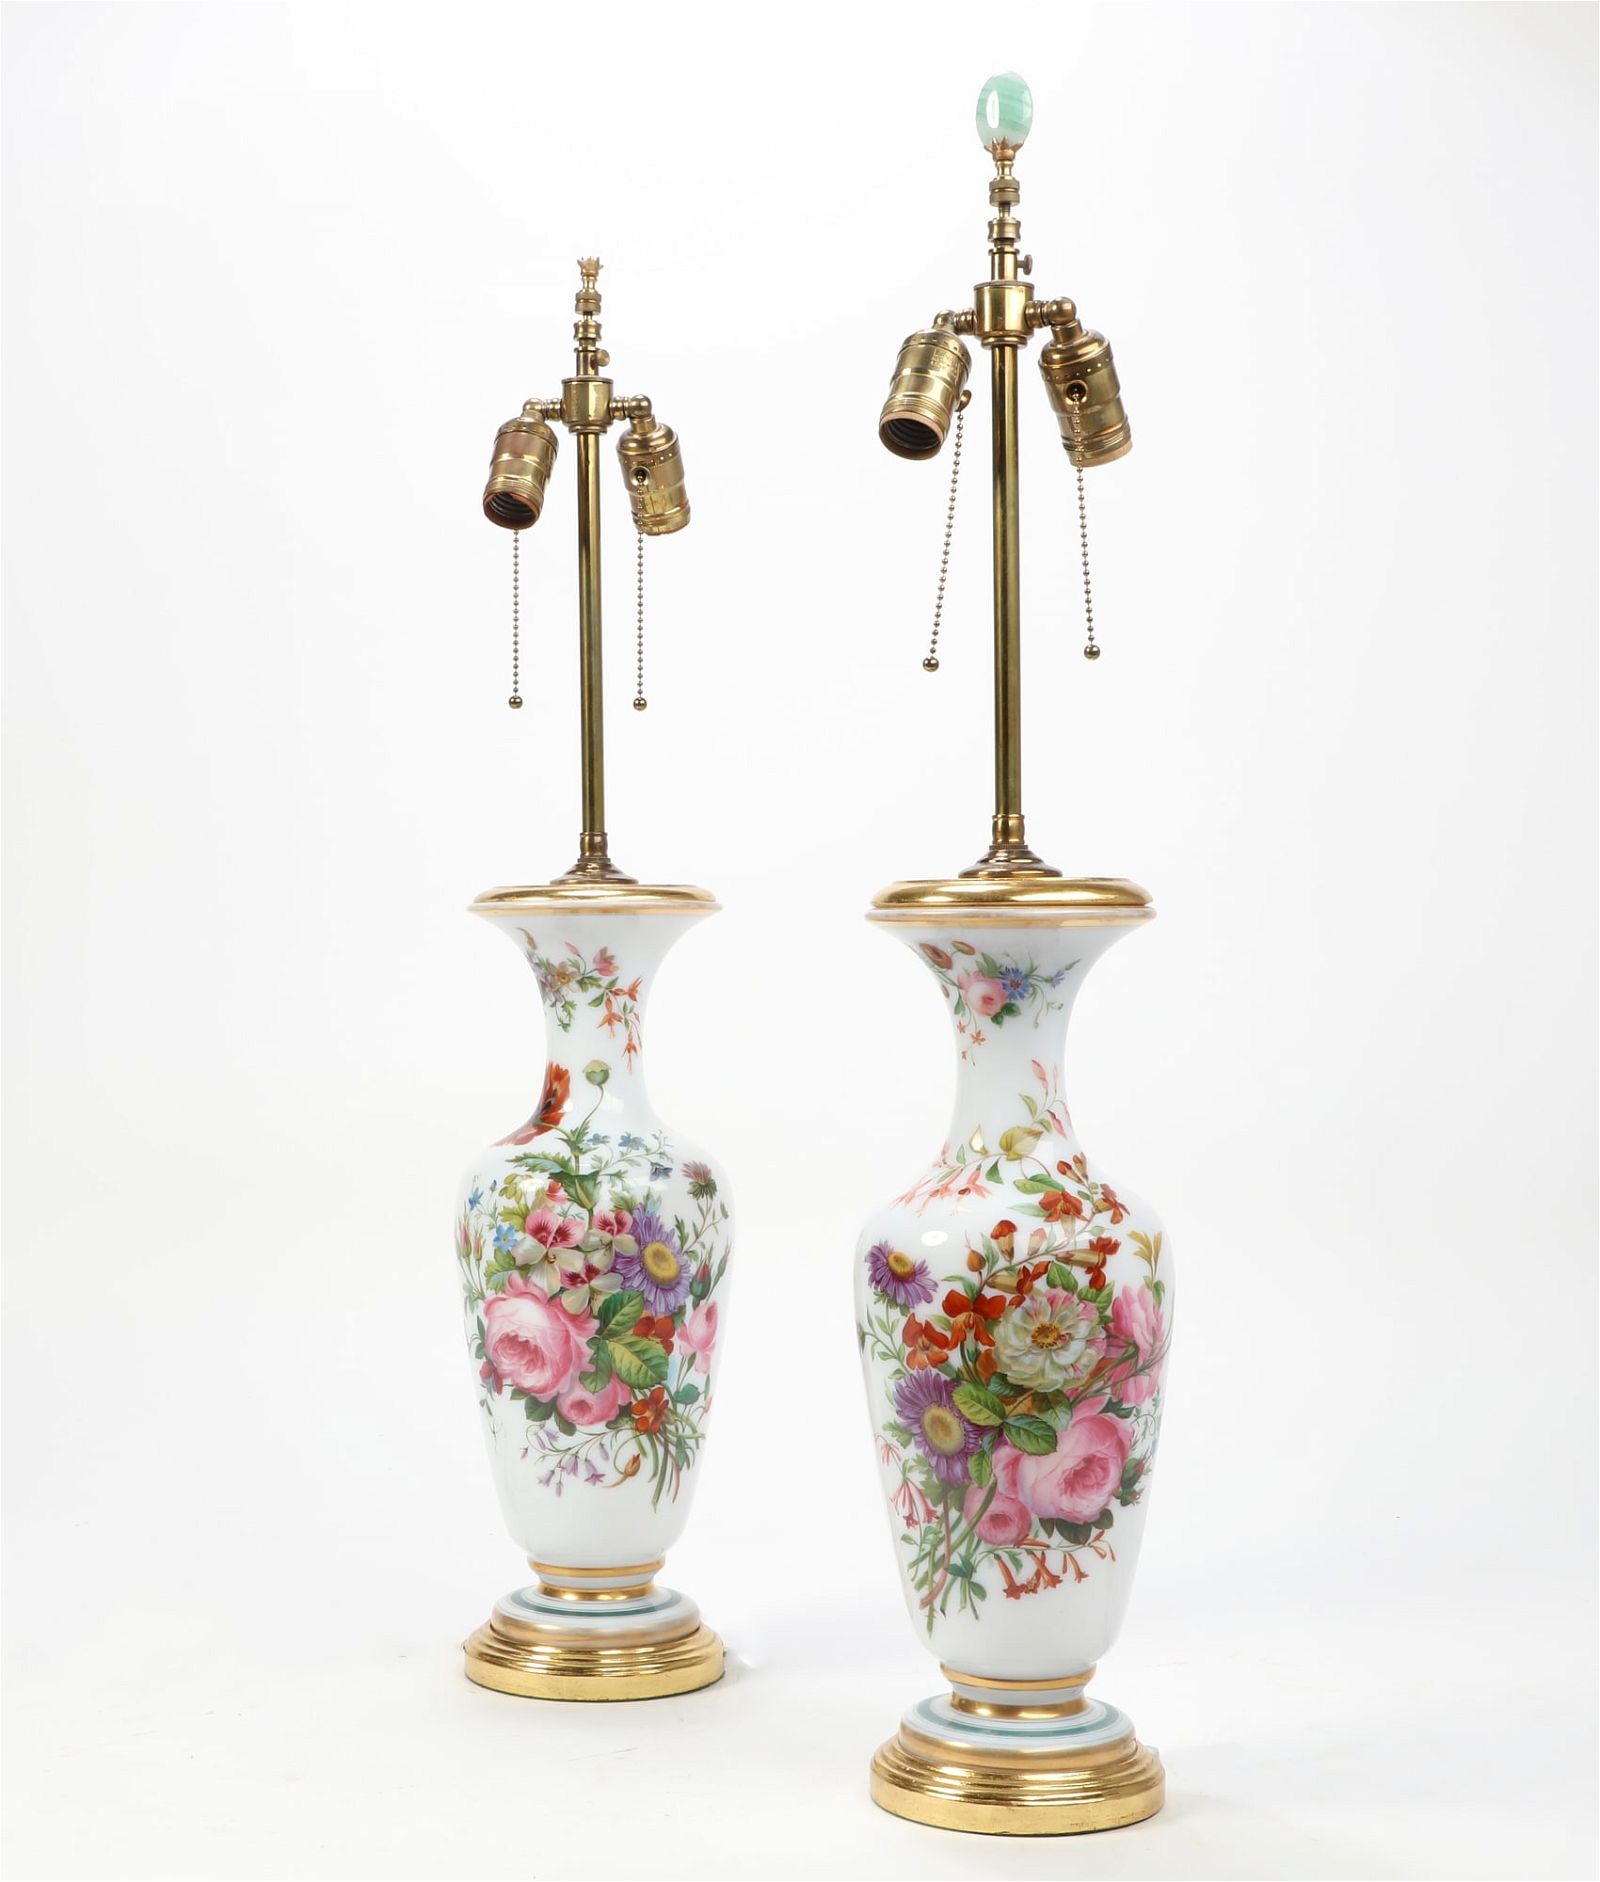 A PAIR OF FRENCH PORCELAIN VASES